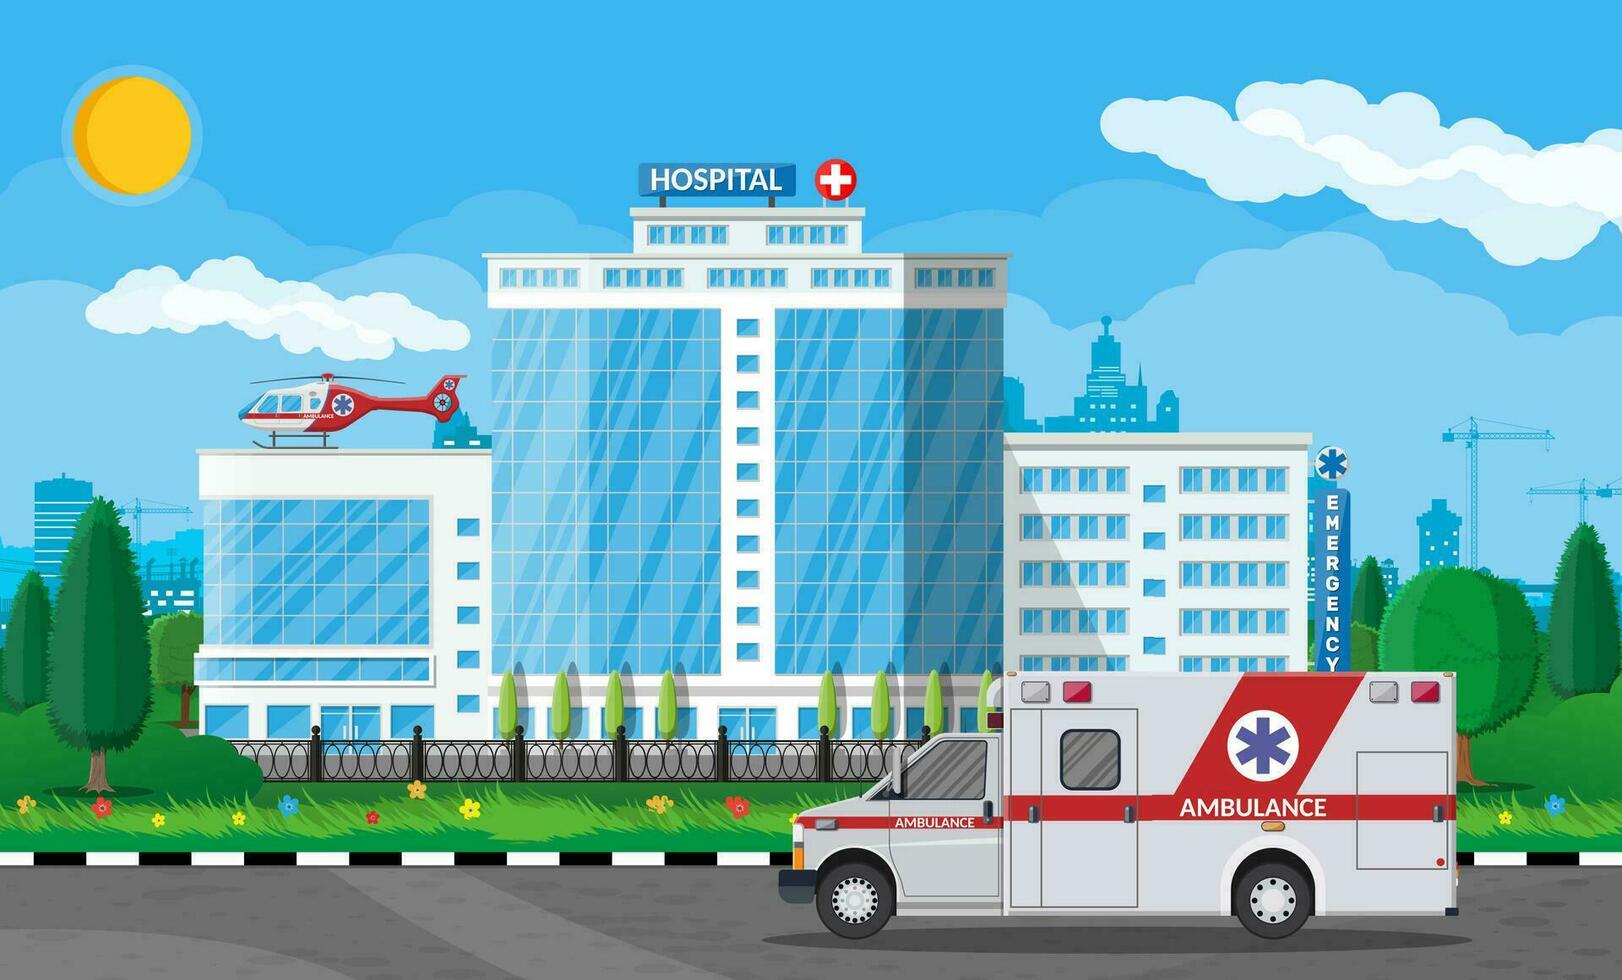 Hospital building, medical icon. Healthcare, hospital and medical diagnostics. Urgency and emergency services. Road, sky, tree. Car and helicopter. Vector illustration in flat style